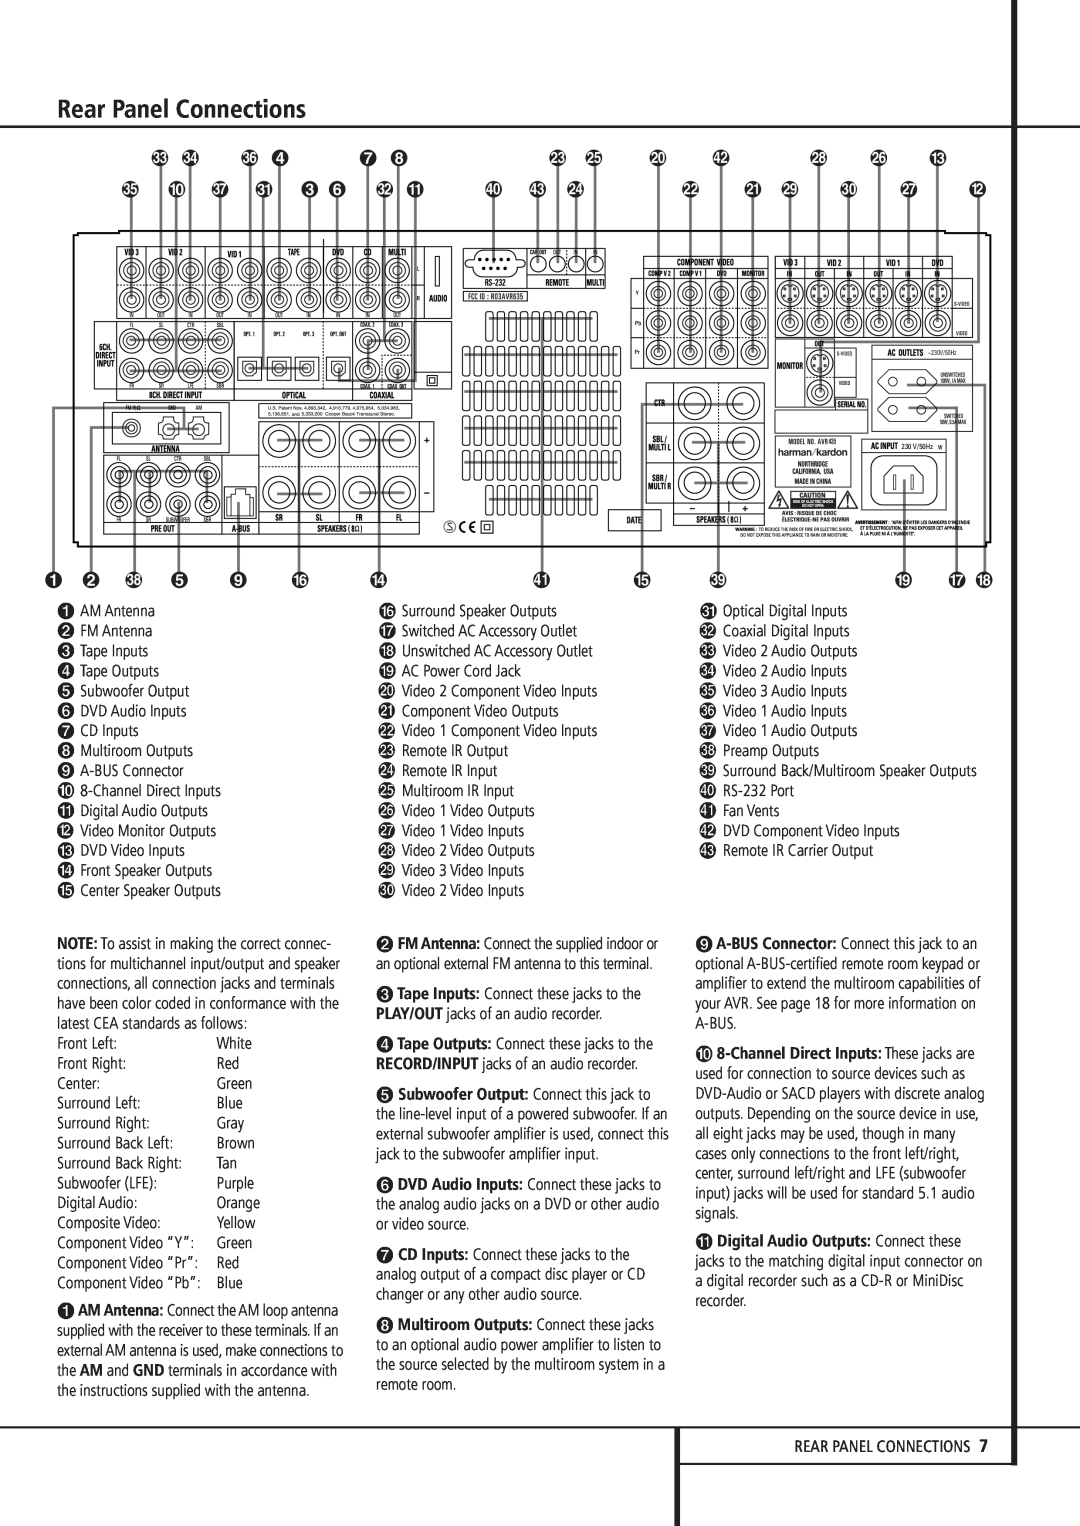 Harman-Kardon AVR 435 owner manual Rear Panel Connections, Digital Audio Outputs: Connect these 